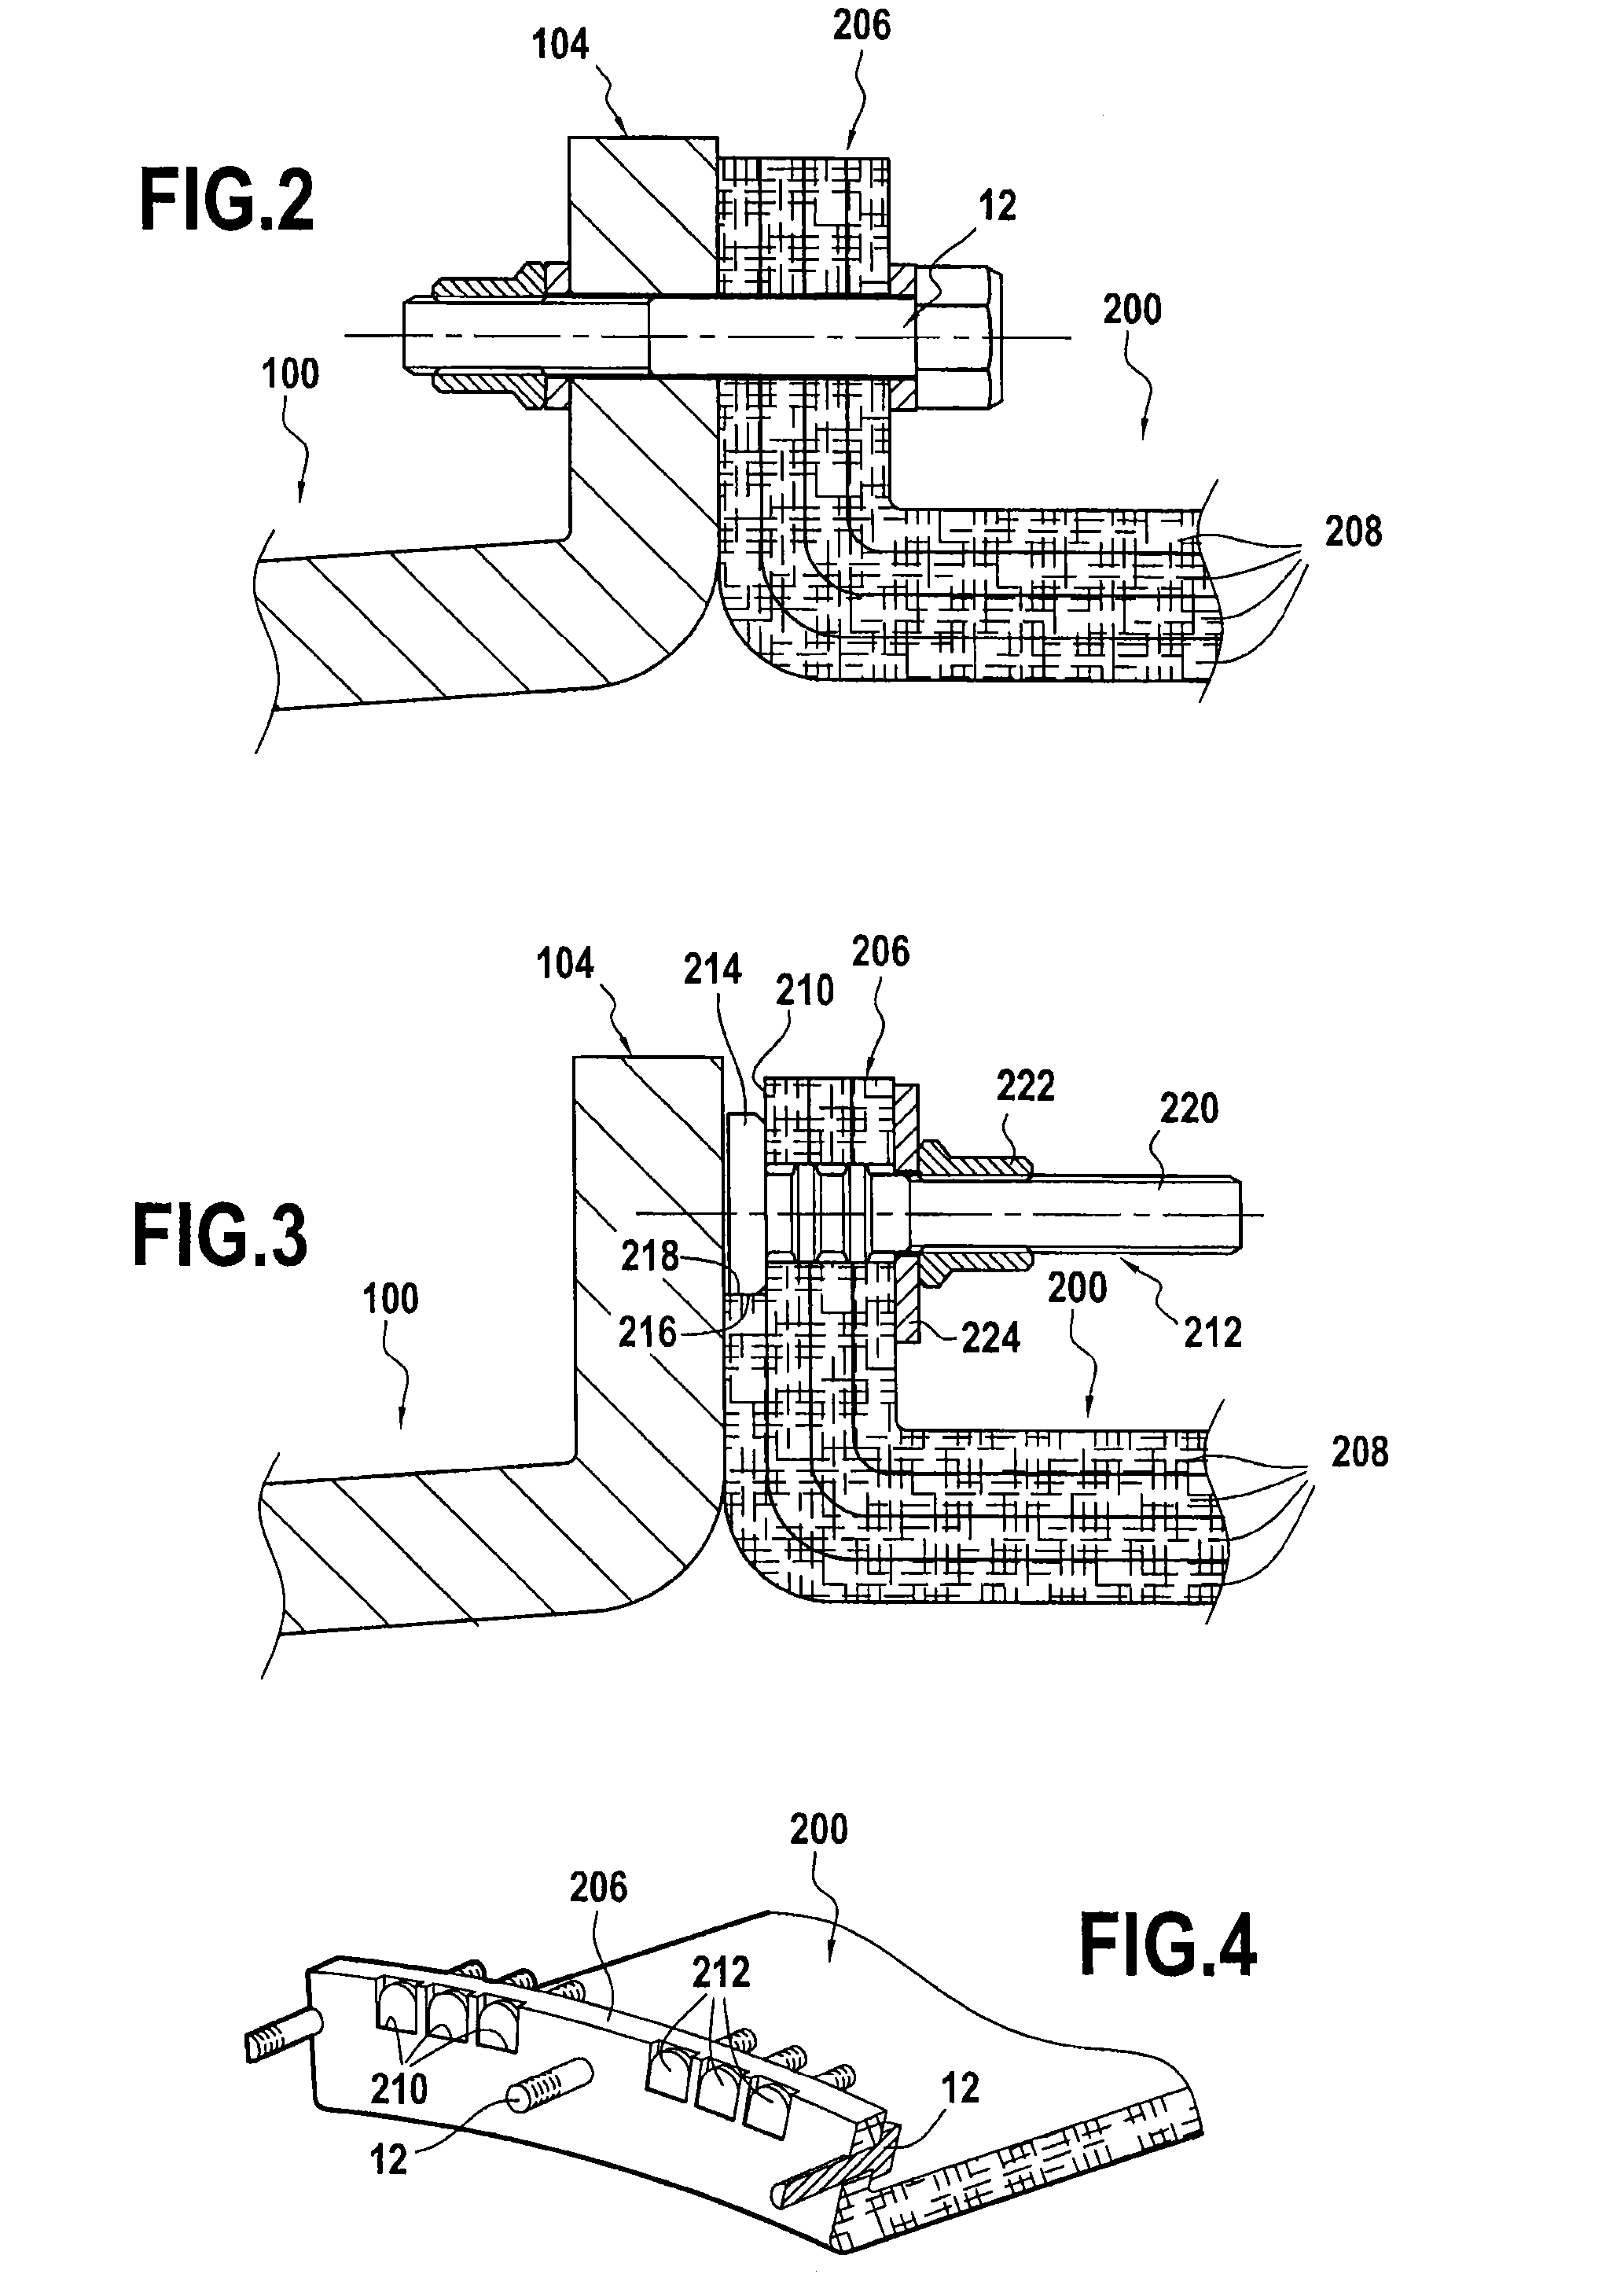 Gas turbine engine fan casing having a flange for fastening pieces of equipment